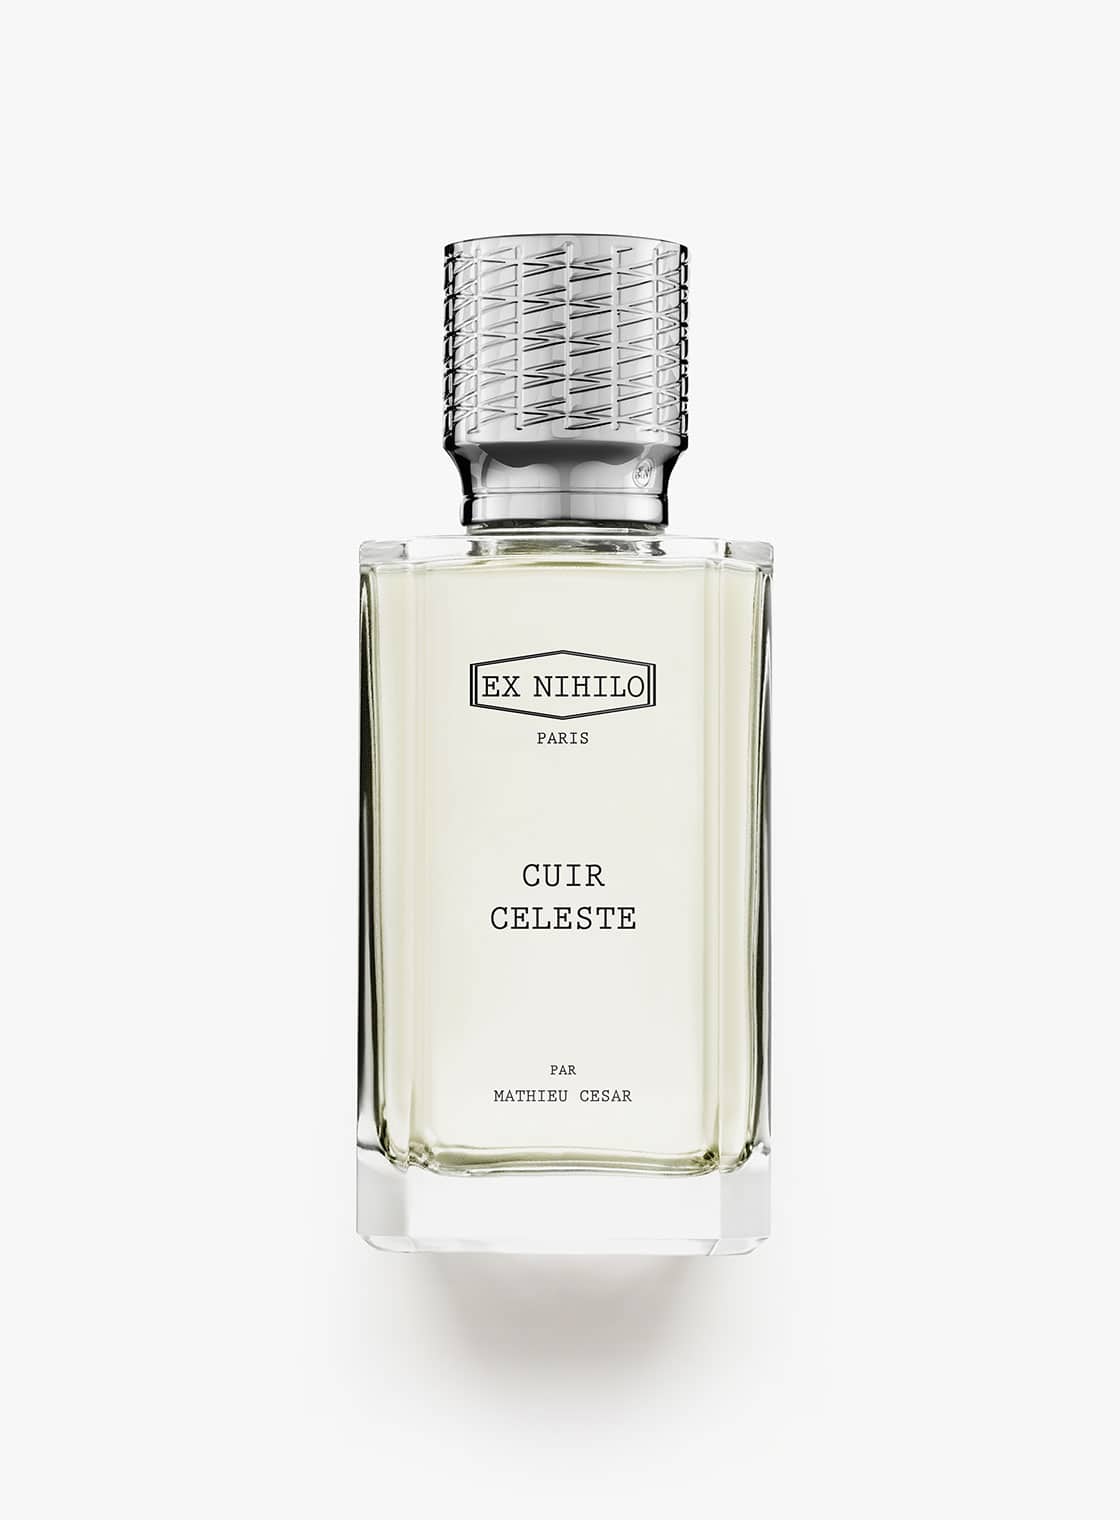 Rituals Adds Car Perfumes to Their Fragrance Line ~ Fragrance News